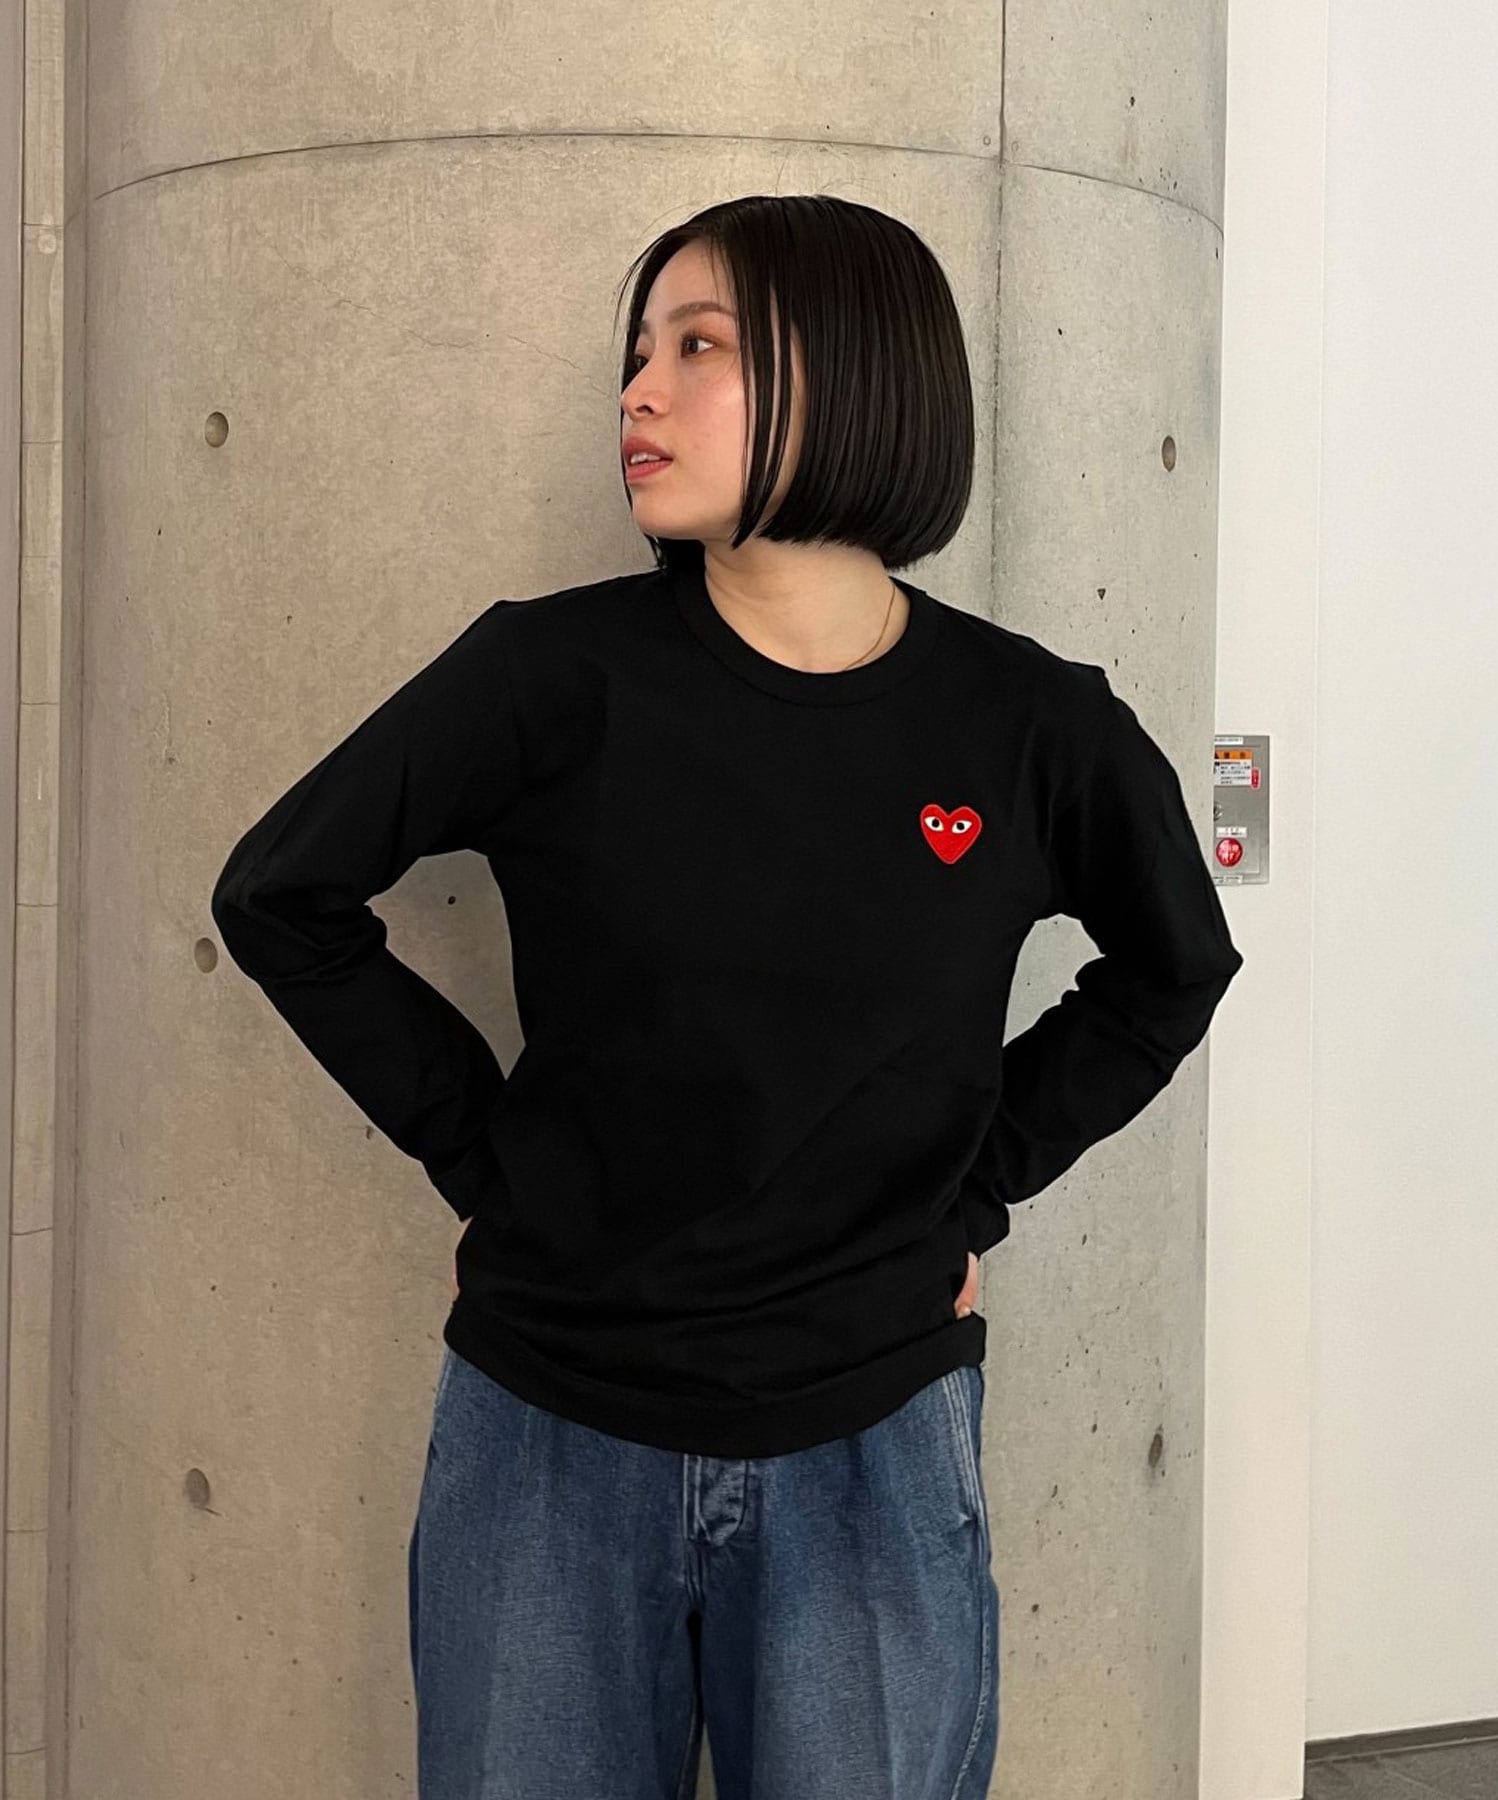 T-SHIRT RED EMBLEM RED HEART PLAY Comme des Garcons